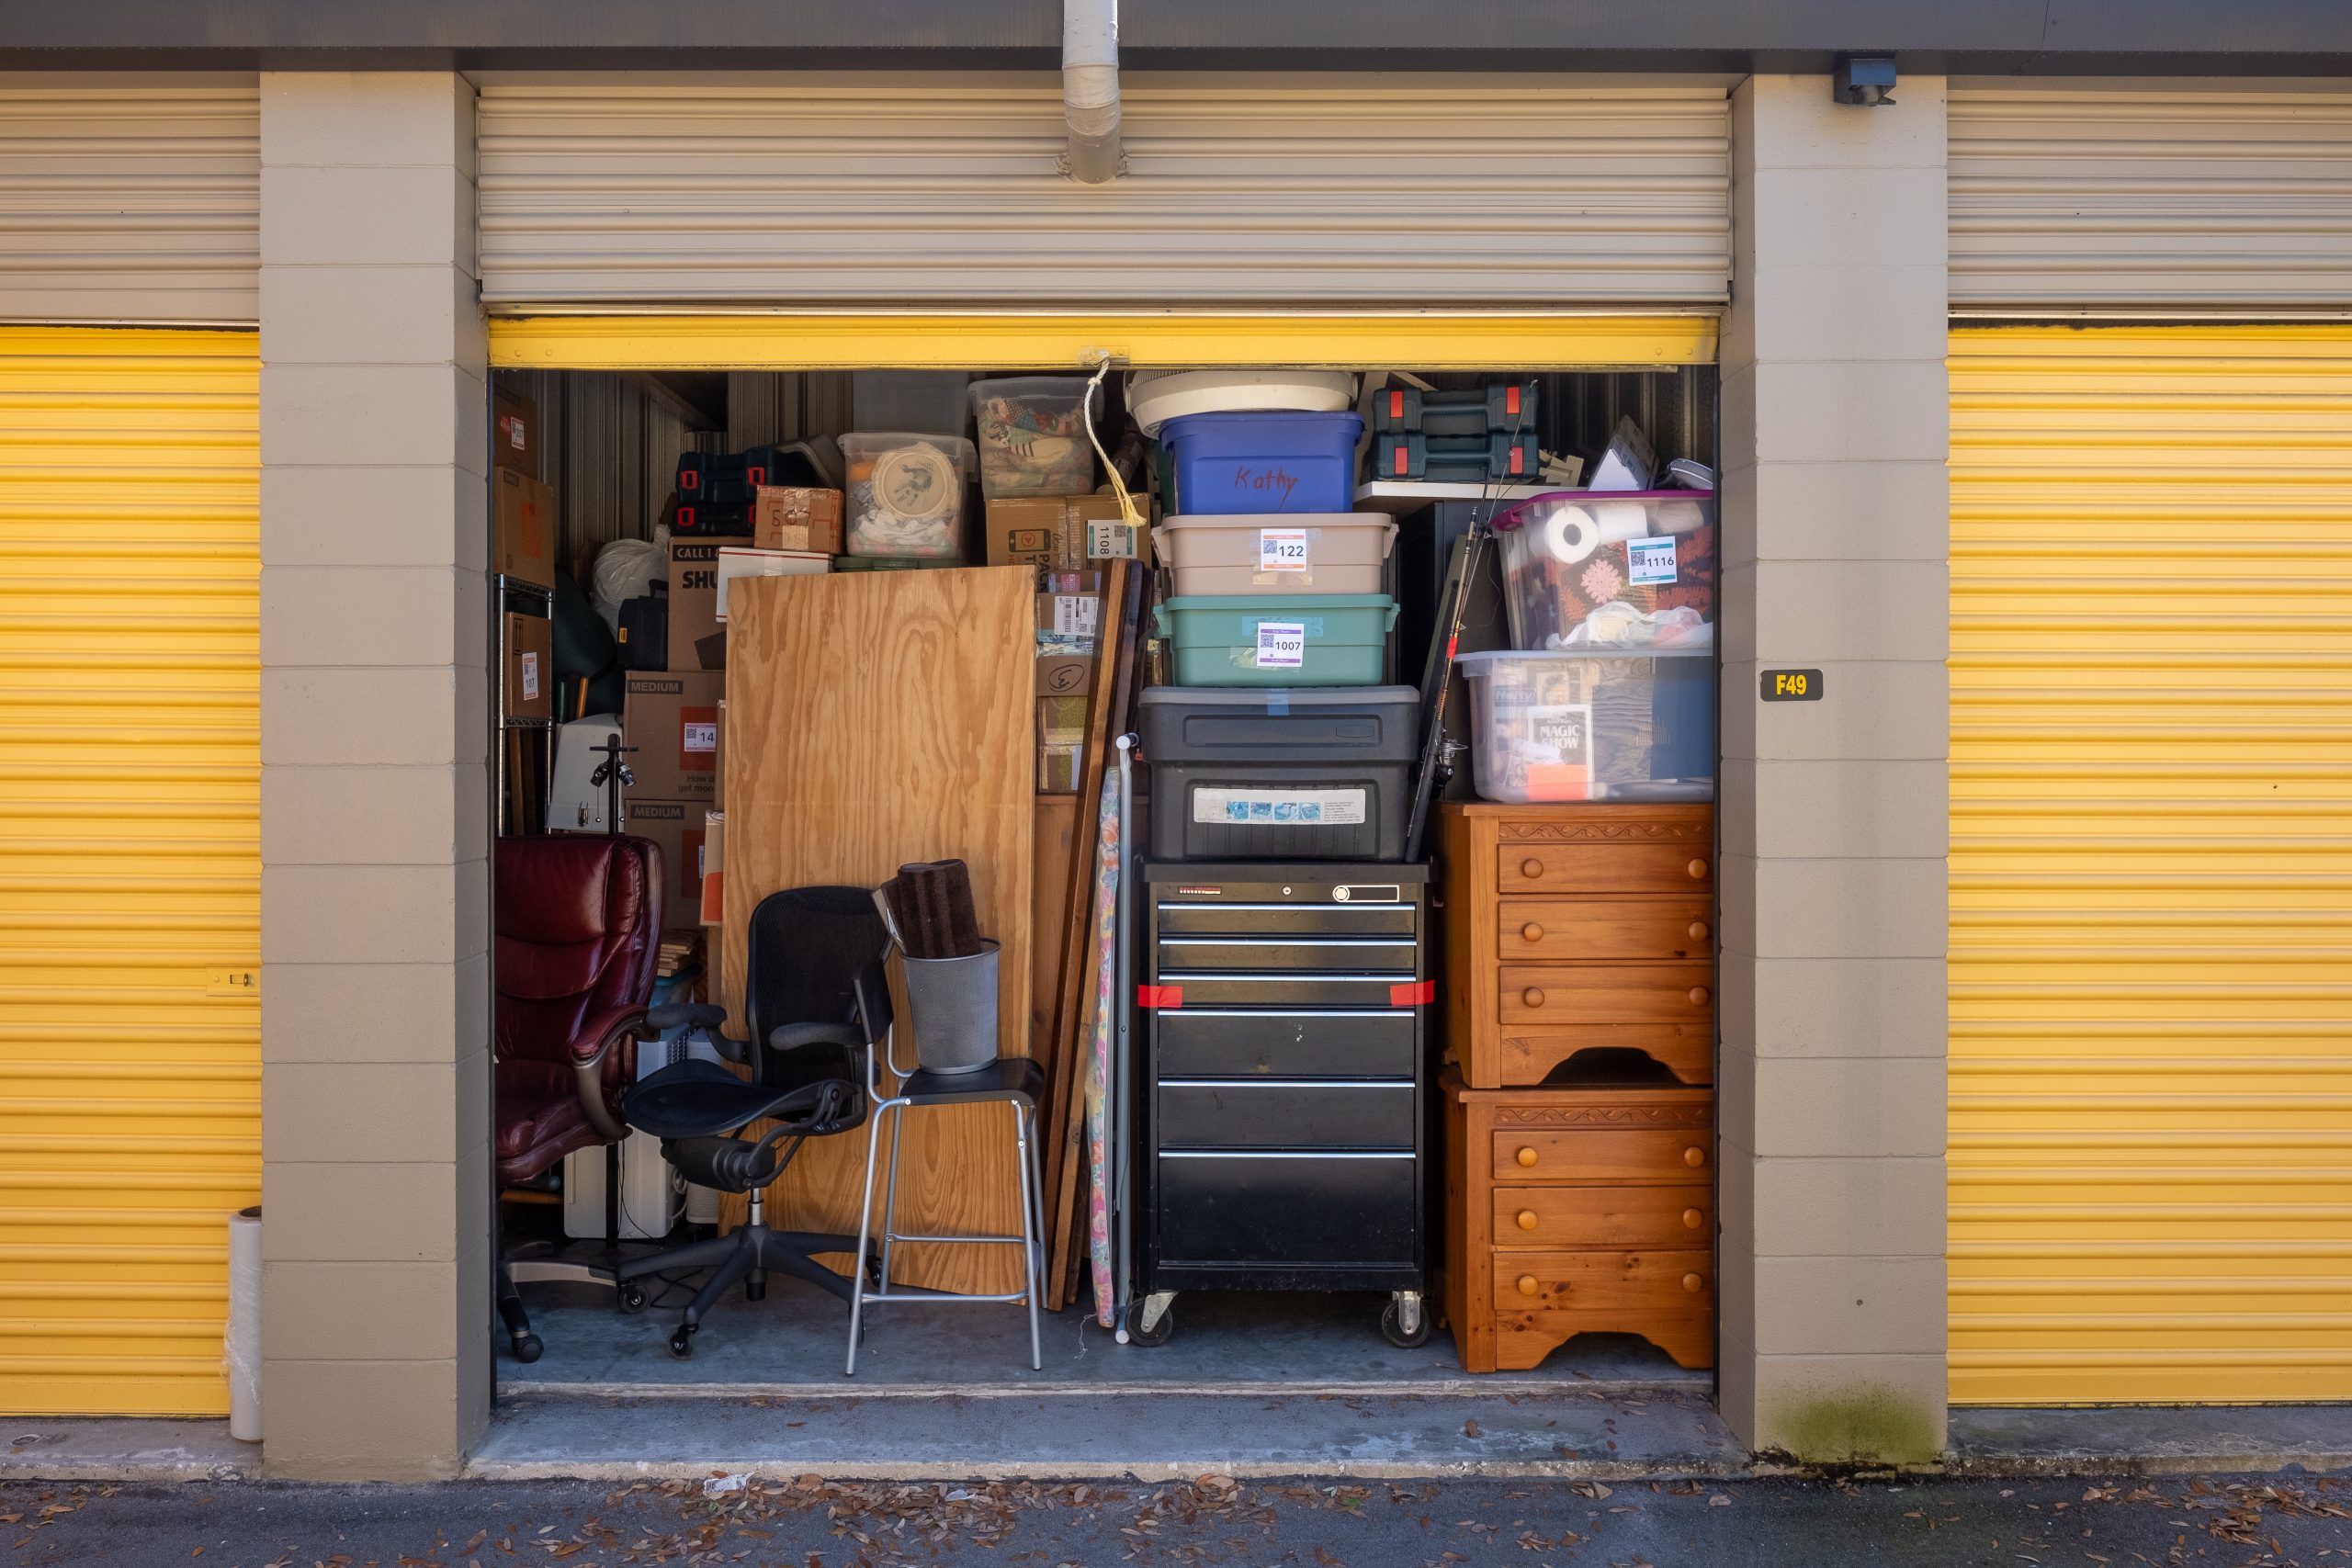 Storage unit packed full of totes, furniture, shop benches, chairs, cardboard boxes and more.